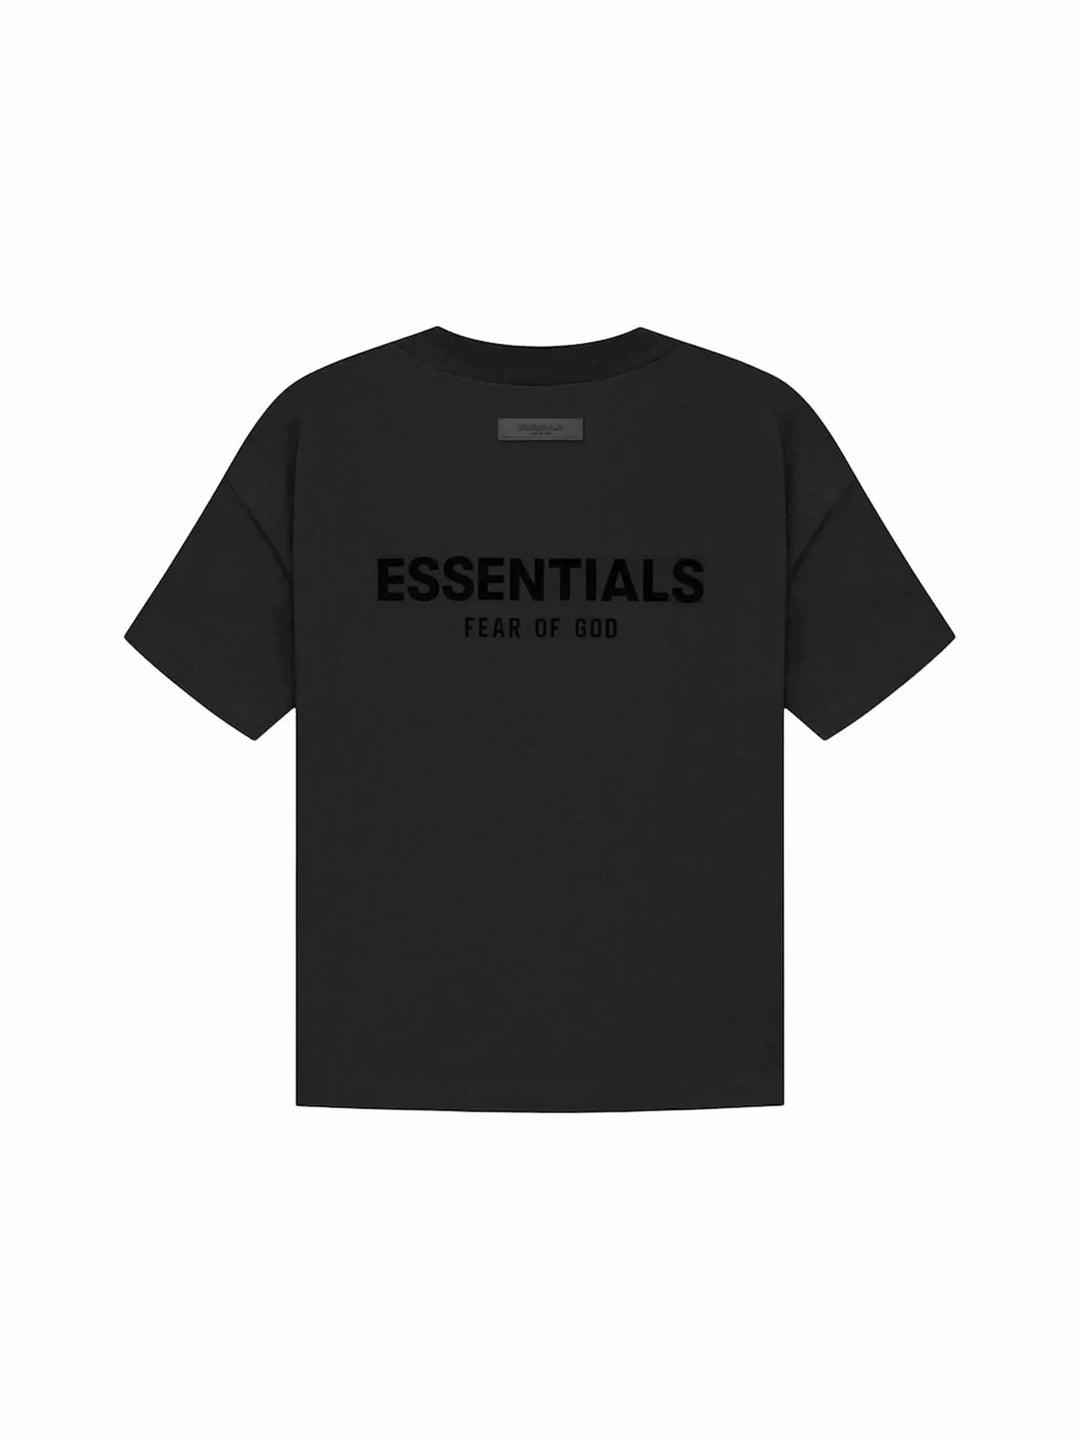 Fear of God Essentials Tee Stretch Limo Prior